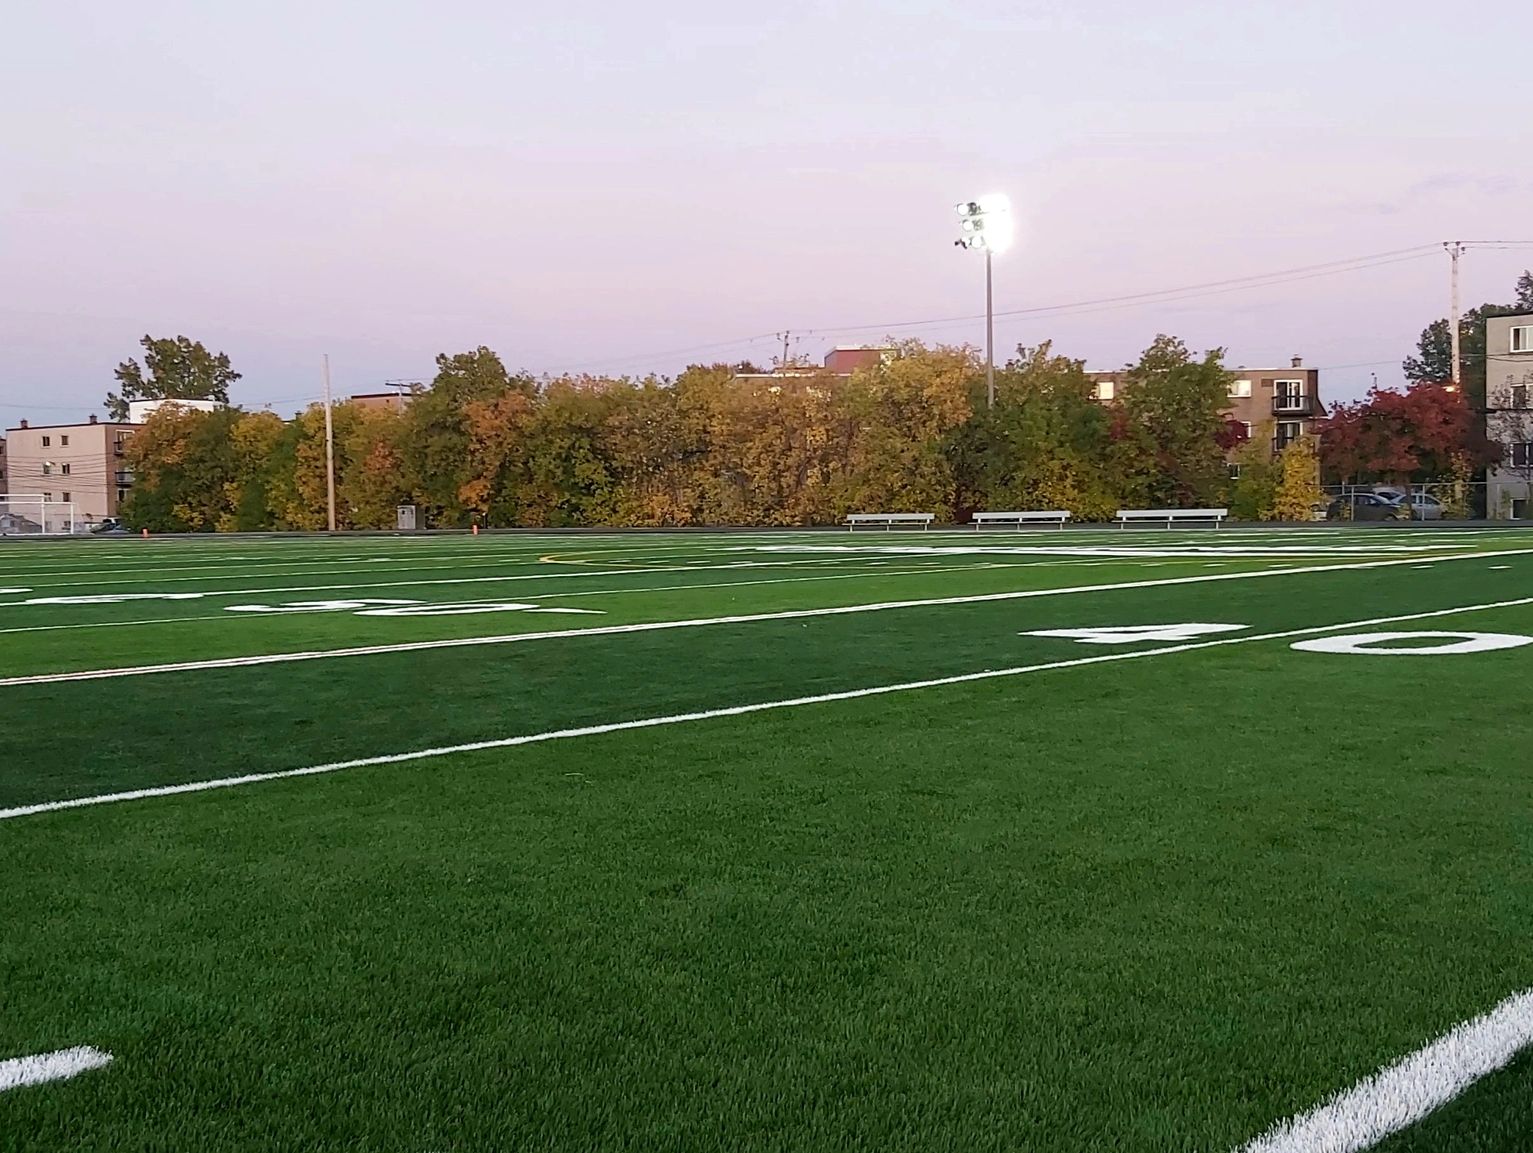 artificial turf field in longueuil. Ecole Jacques rousseau turf field.